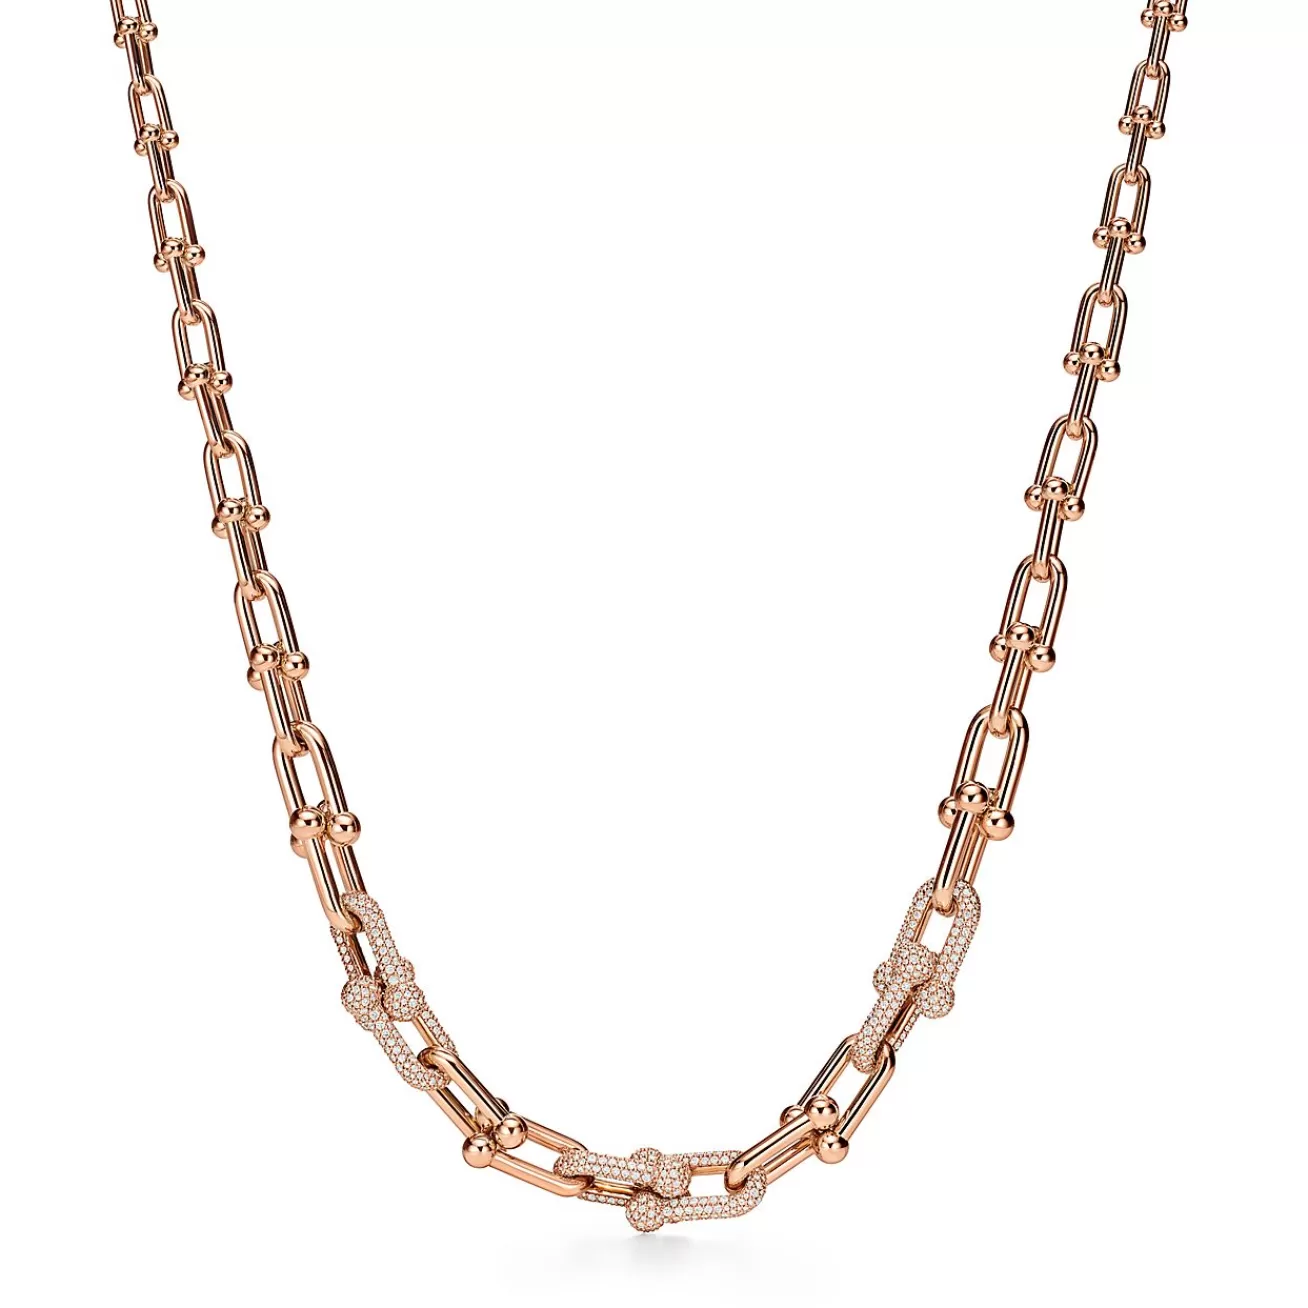 Tiffany & Co. Tiffany HardWear graduated link necklace in 18k rose gold with pavé diamonds. | ^ Necklaces & Pendants | Rose Gold Jewelry